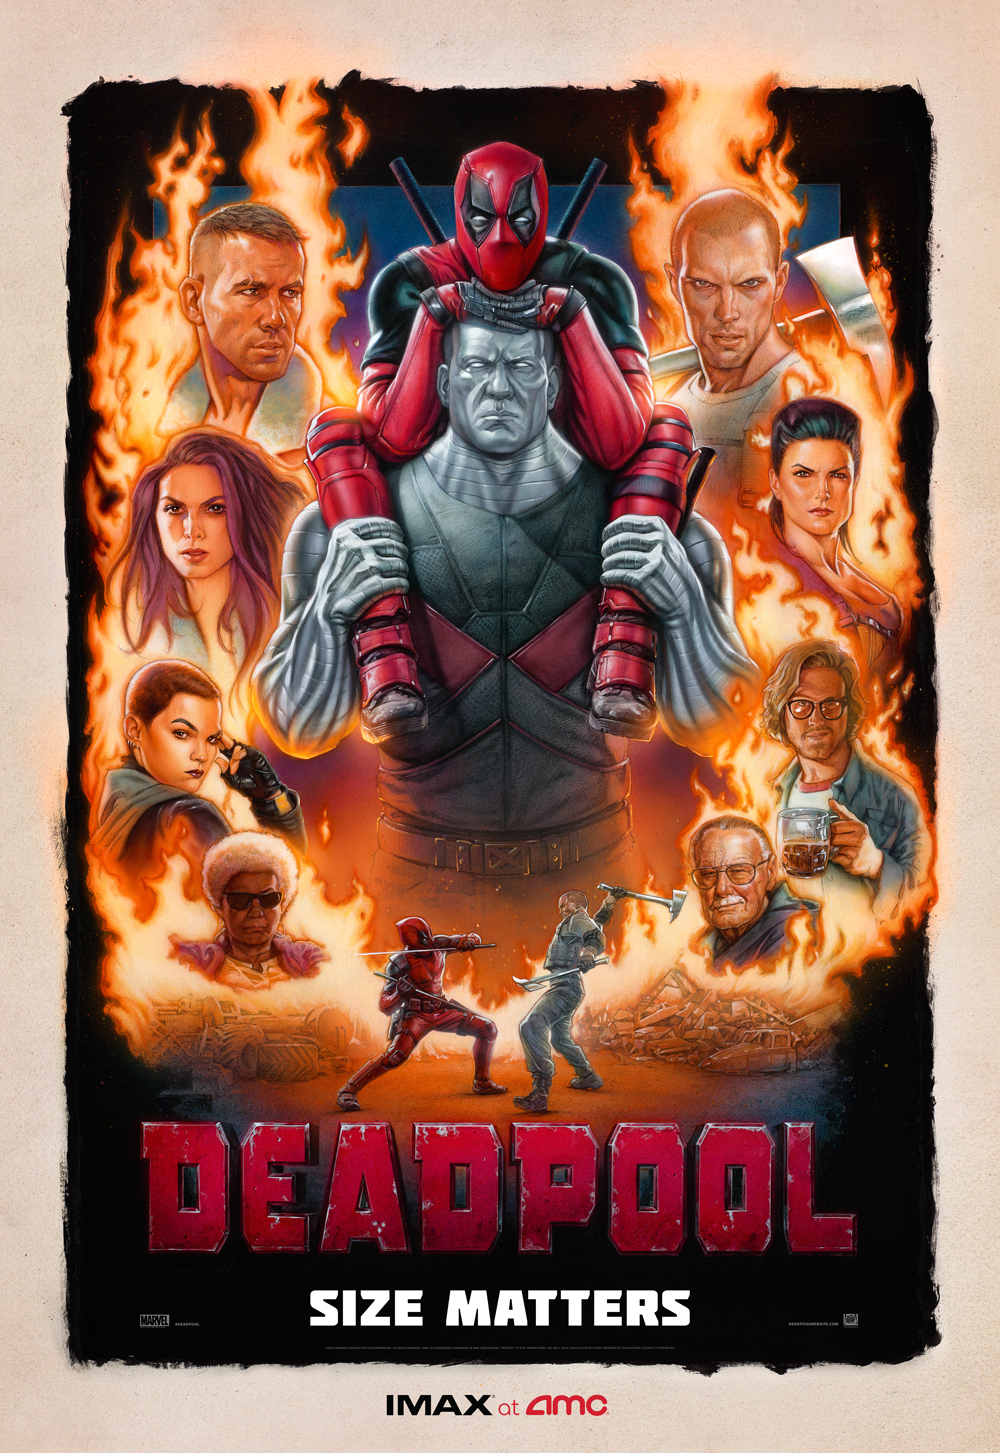 Deadpool IMAX Mini-Poster & Collector's Ticket Revealed